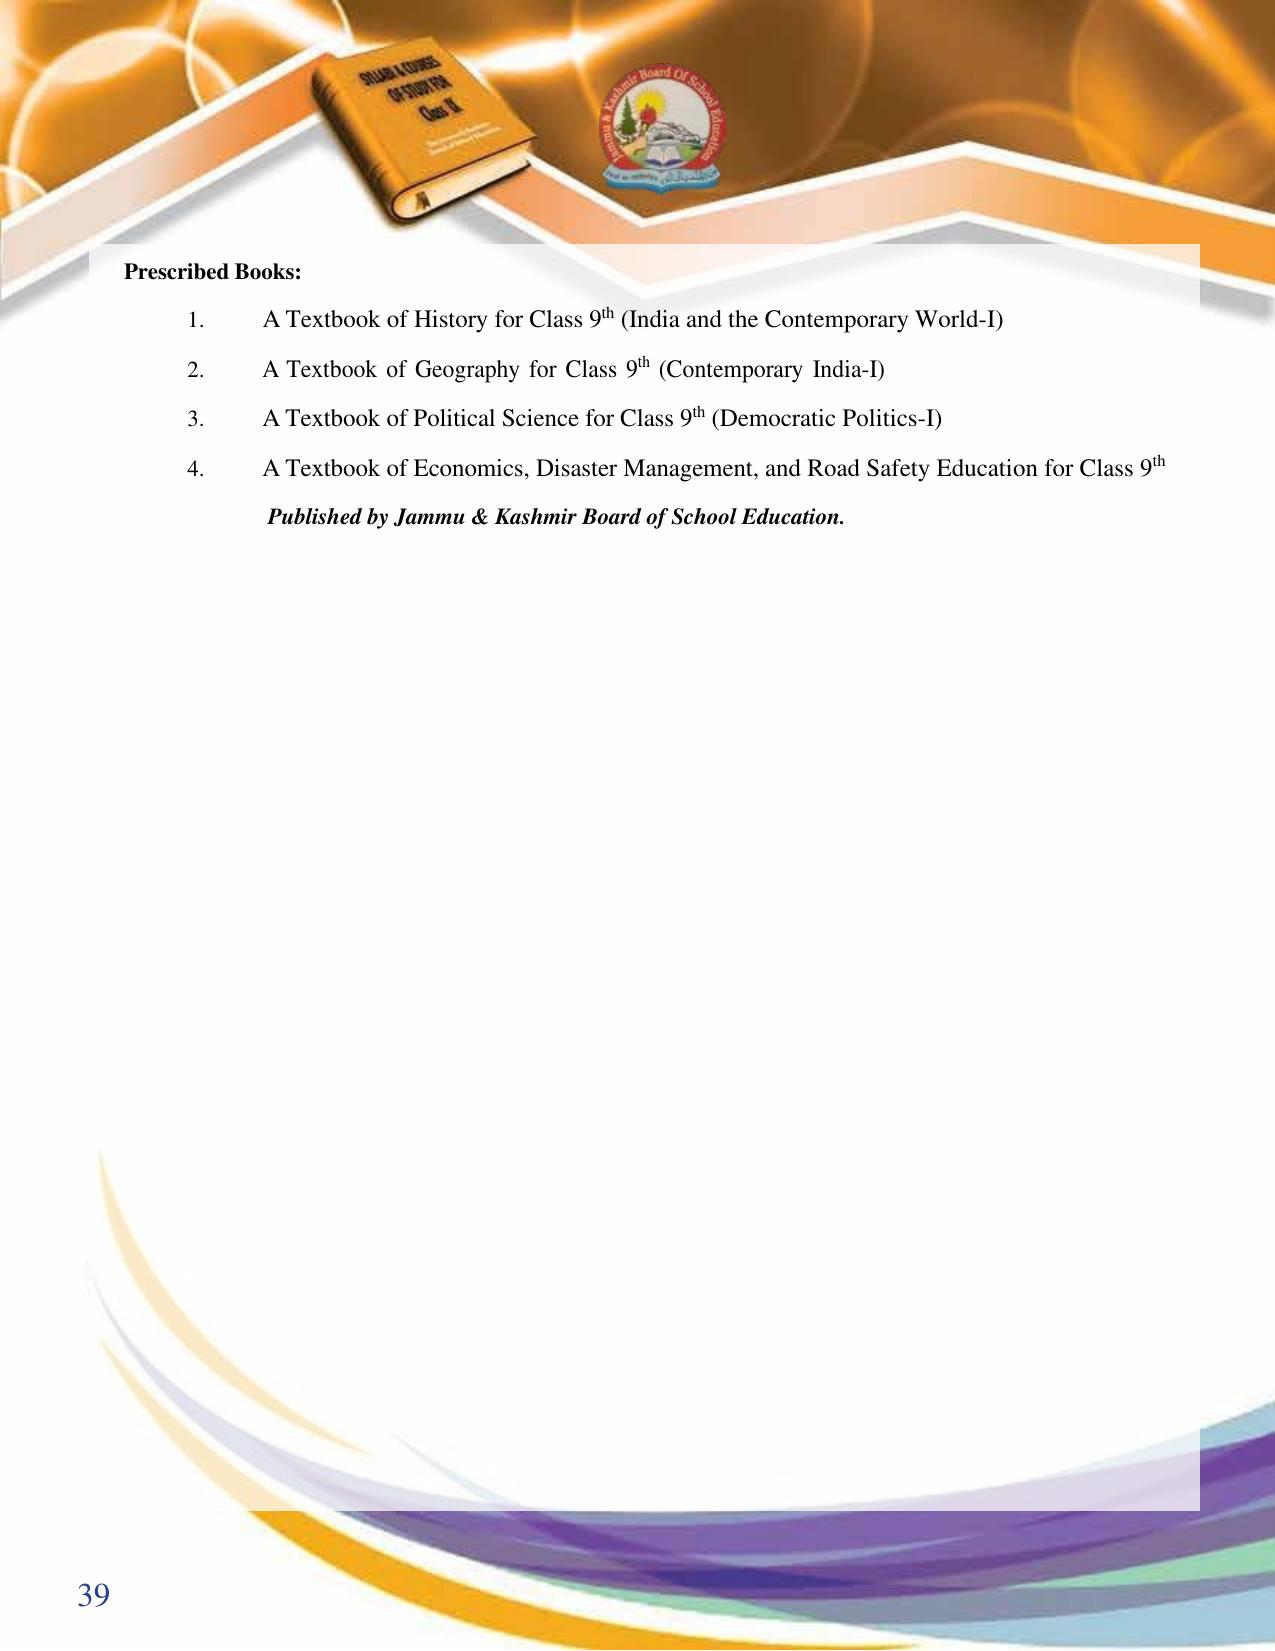 JKBOSE Syllabus for 9th class - Page 40